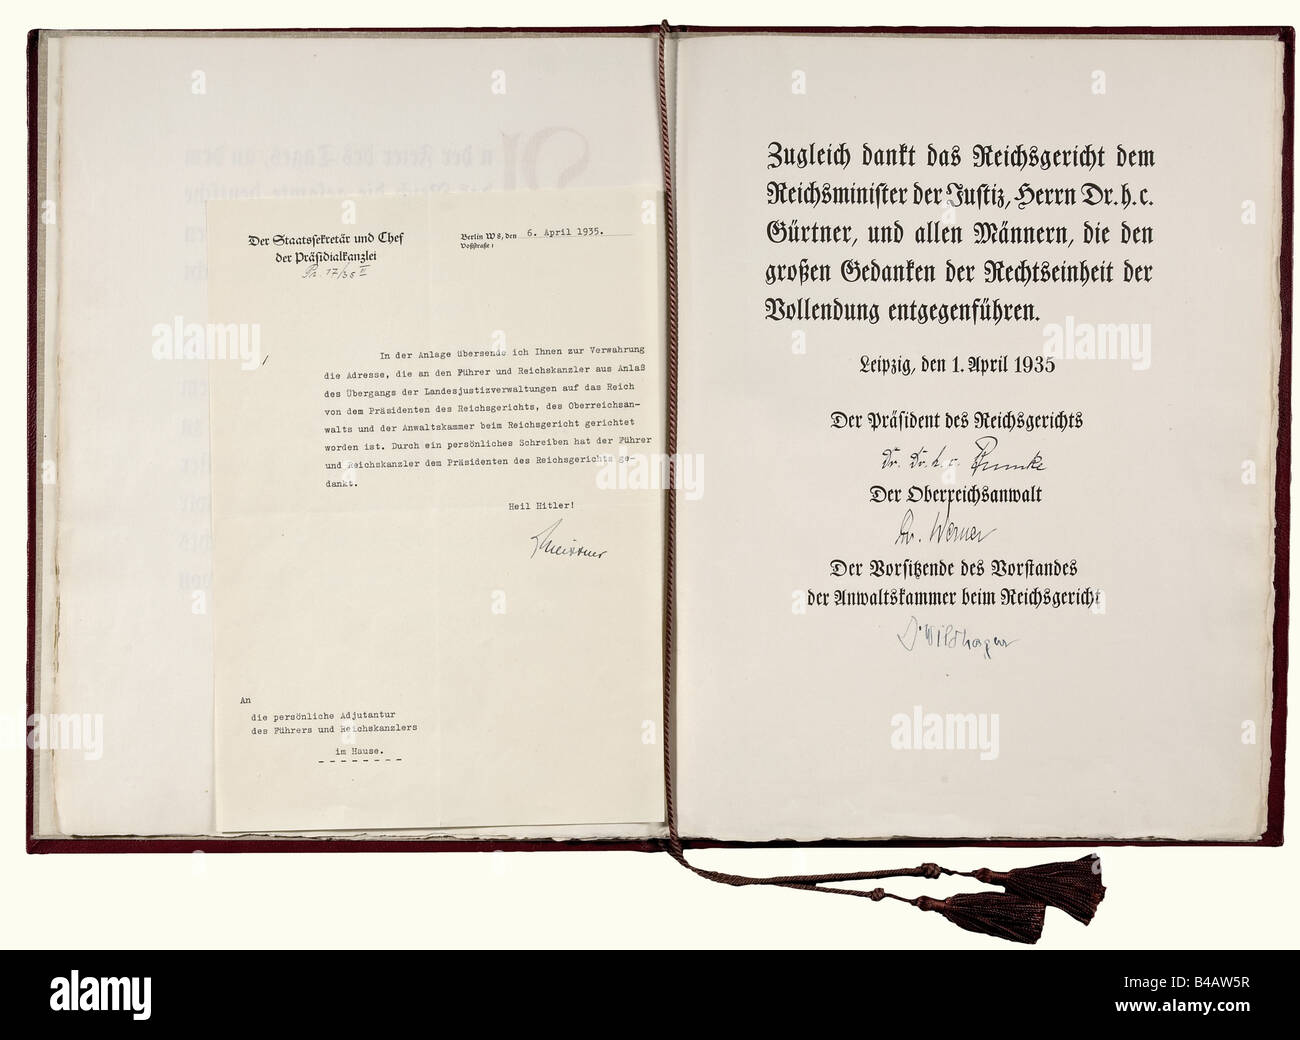 Adolf Hitler - a certificate of thanks of the Reichscourt Leipzig., Two-page printed text thanking for the 'Drittes Gesetz zur Überleitung der Rechtspflege auf das Reich' from 24th January 1935, a law which made the judicial authorities of the states subordinate to the Reichscourt. Issued in Leipzig, 1st April 1935 and signed by the President of the Reichscourt Dr. h.c. Erwin Bumke, the Supreme Attorney of the Reich Dr. Werner and the Chairman of the Chamber of Lawyers Dr. Wildhagen. Red leather folder with gold imprinting. 39 x 29.5 cm. Additionally the cover , Stock Photo